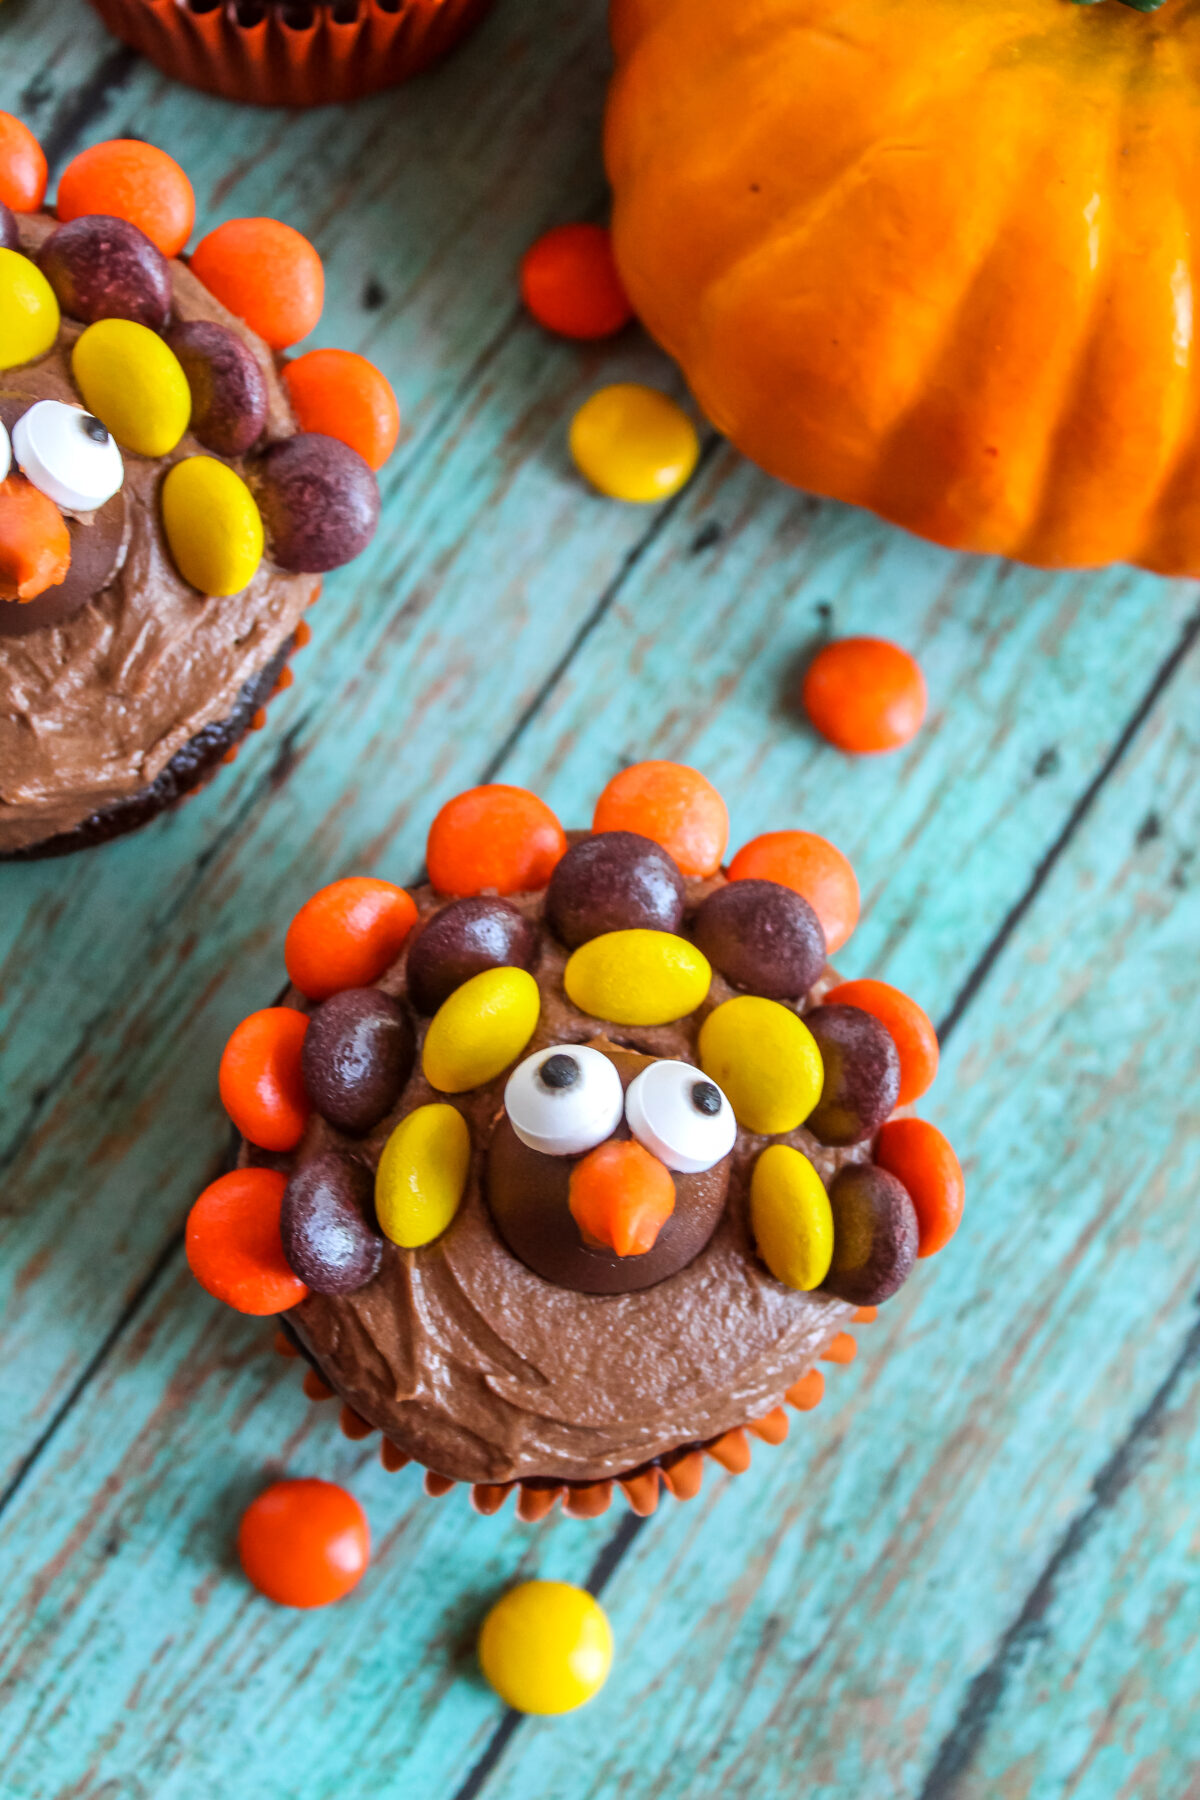 These fun and easy to make Thanksgiving turkey cupcakes will be a hit with kids of all ages. Learn how to decorate cupcakes like turkeys!